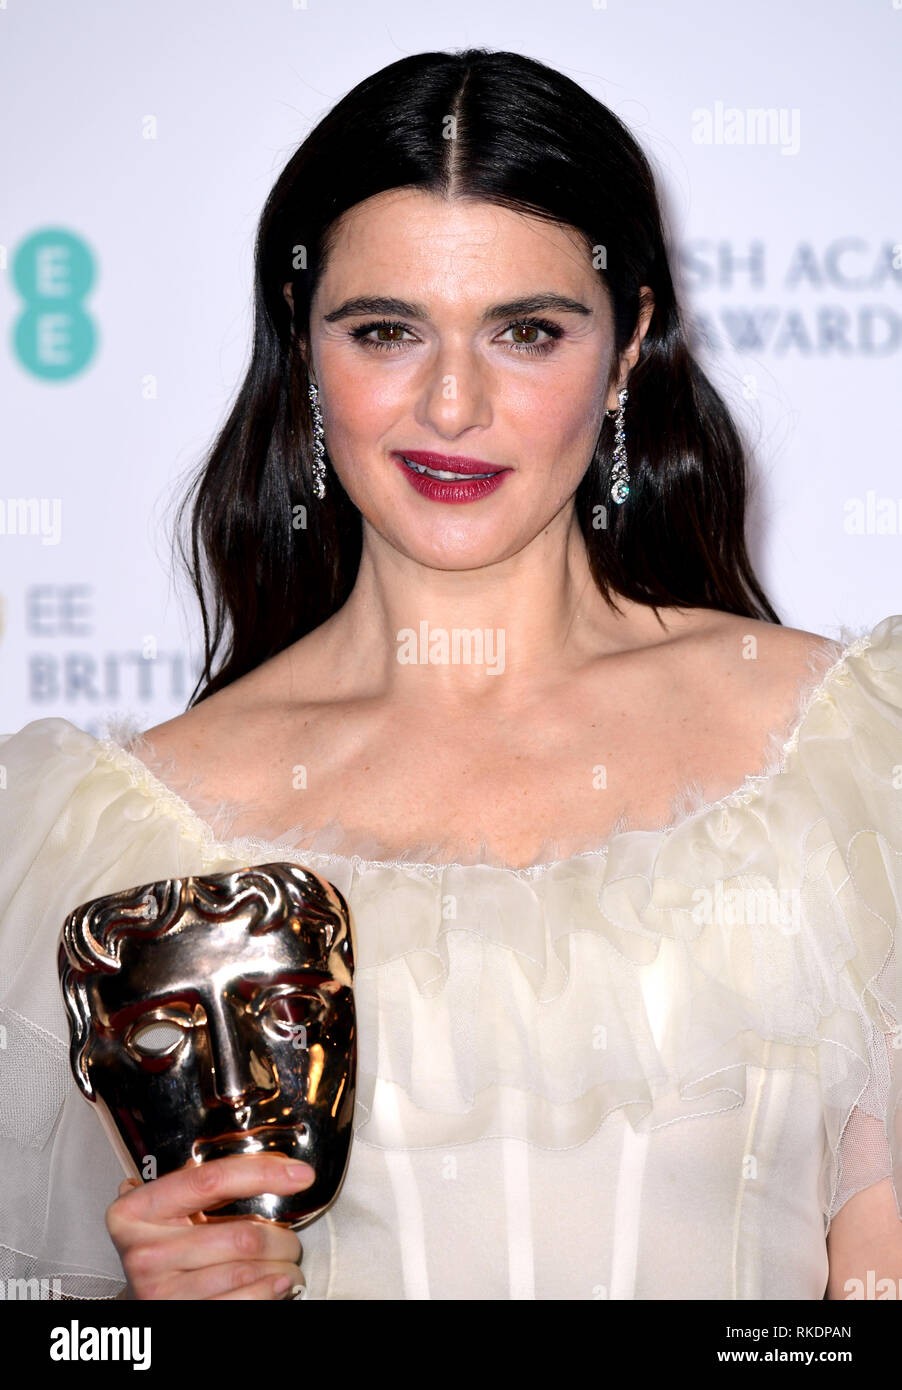 Rachel Weisz with her Best Actress in a Supporting Role Bafta for The Favourite in the press room at the 72nd British Academy Film Awards held at the Royal Albert Hall, Kensington Gore, Kensington, London. Stock Photo